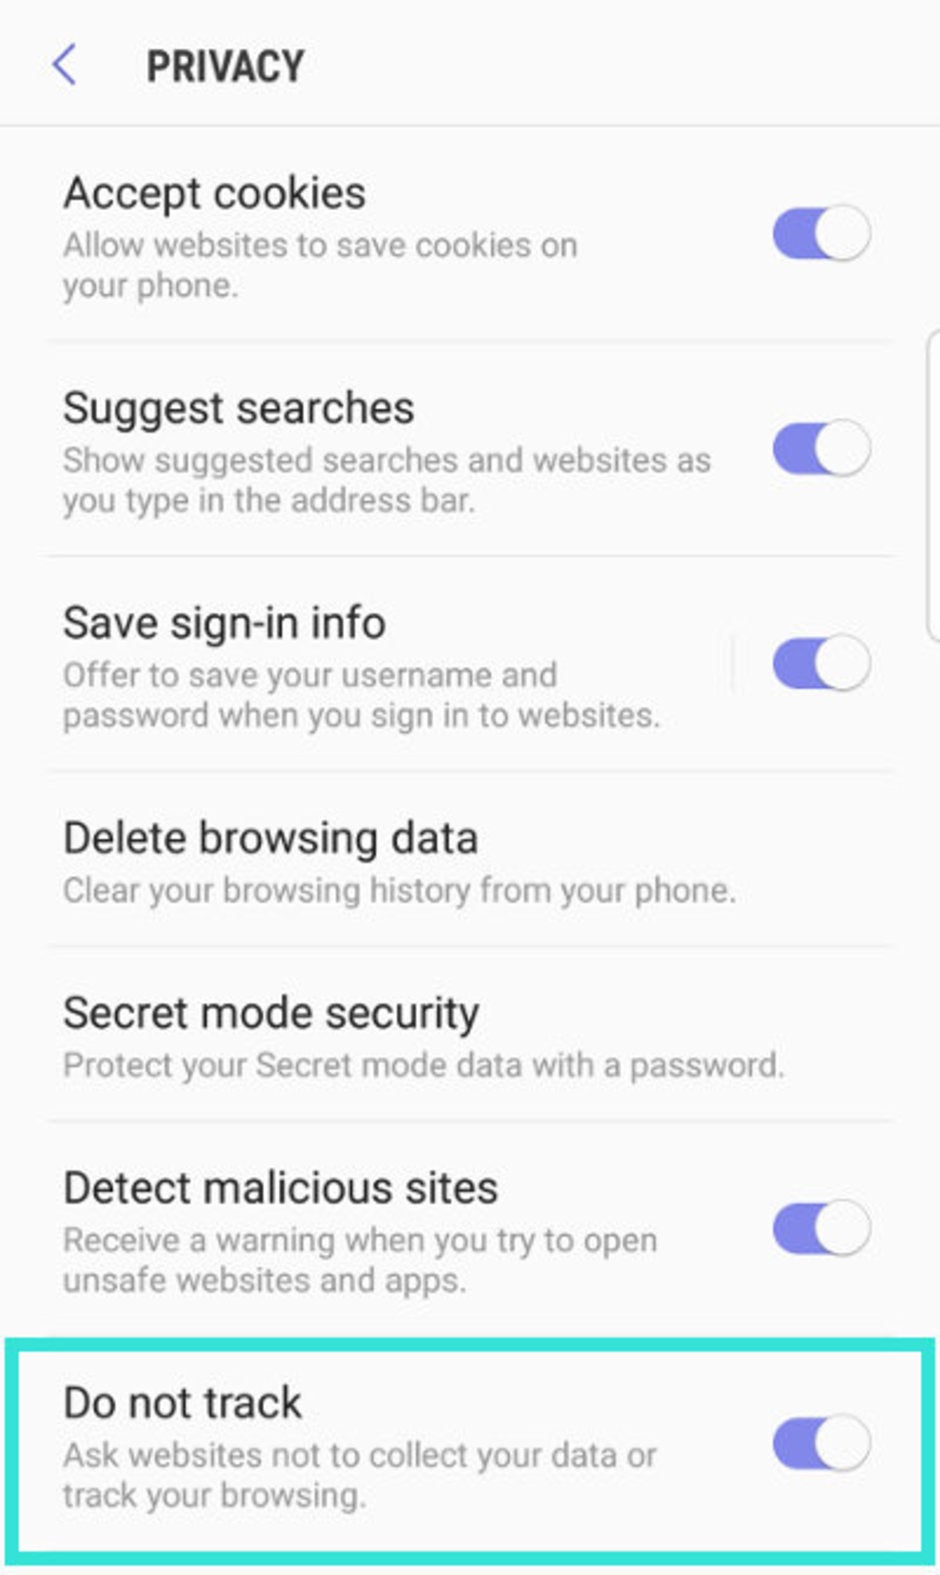 Samsung Internet gains faster file downloads, Do Not Track feature in latest update